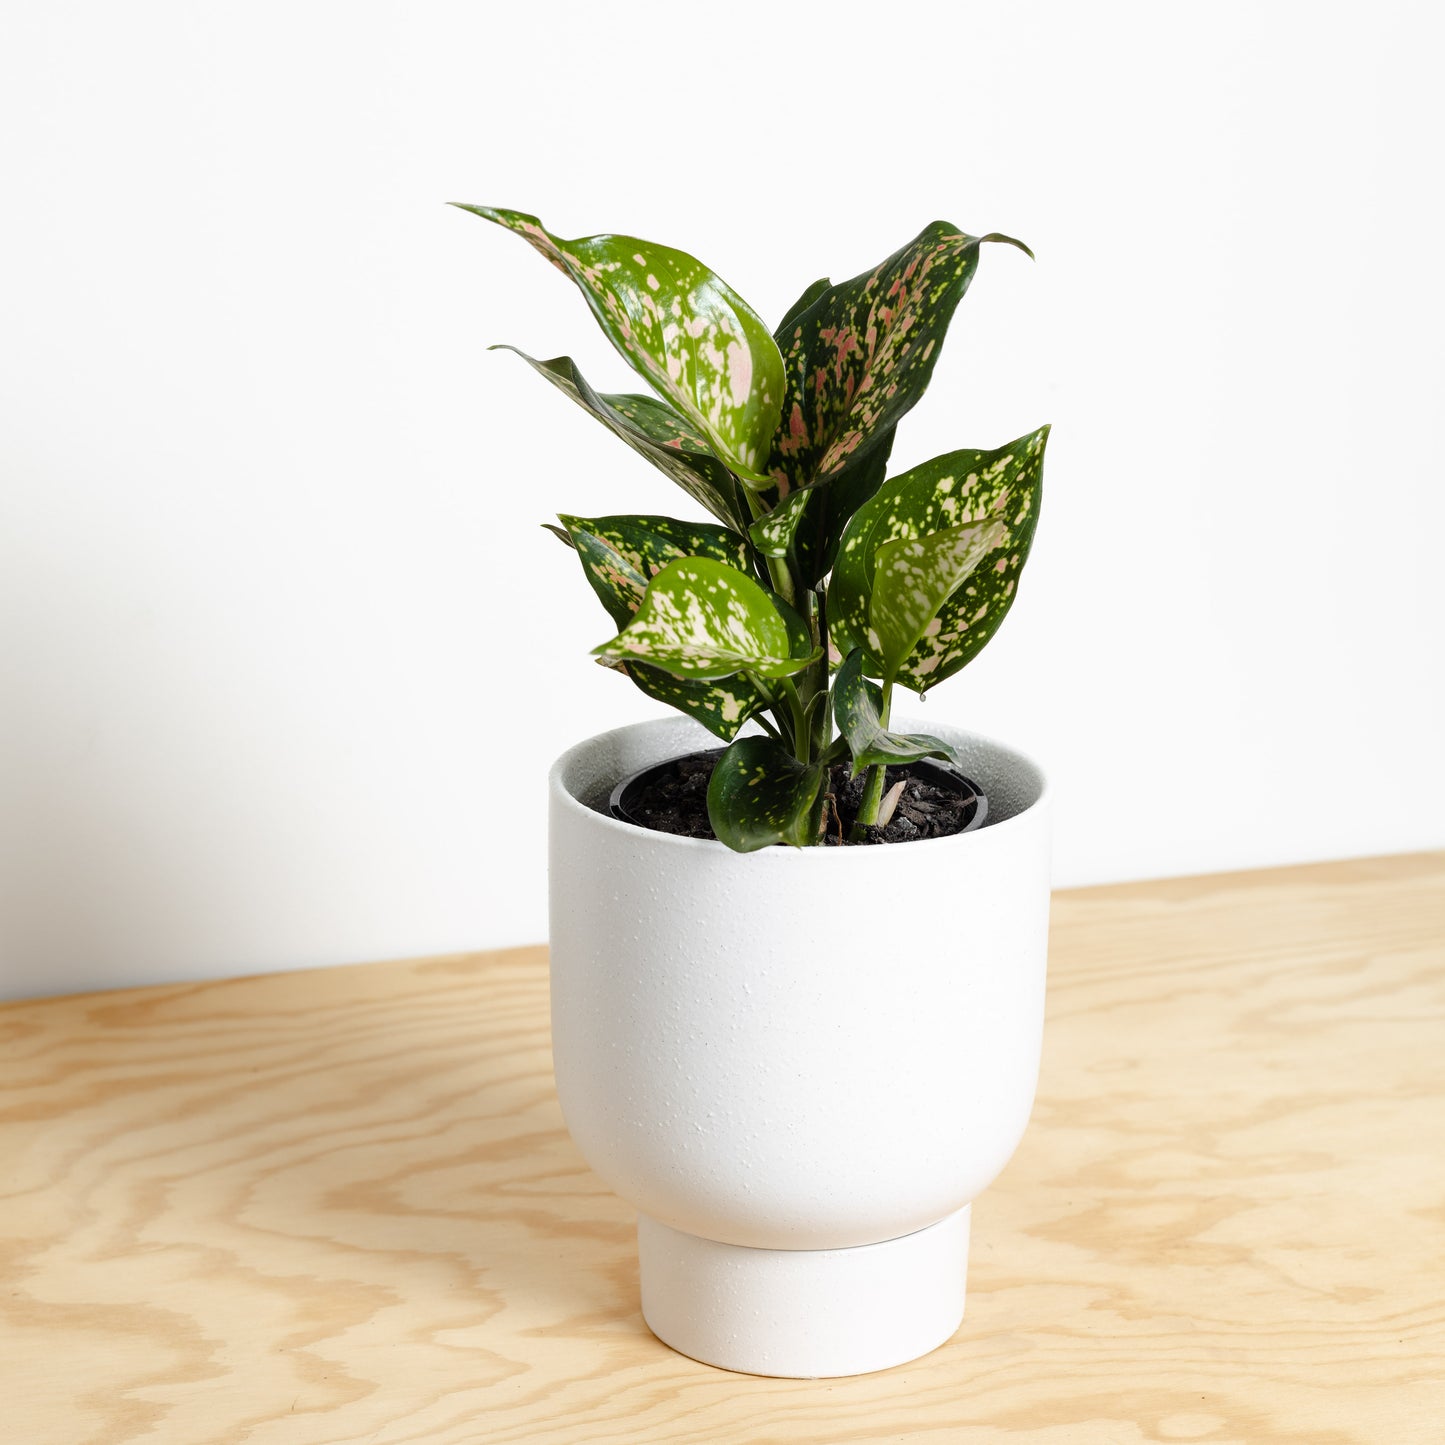 Aglaonema Wishes in White Finch Pot by Evergreen Collective